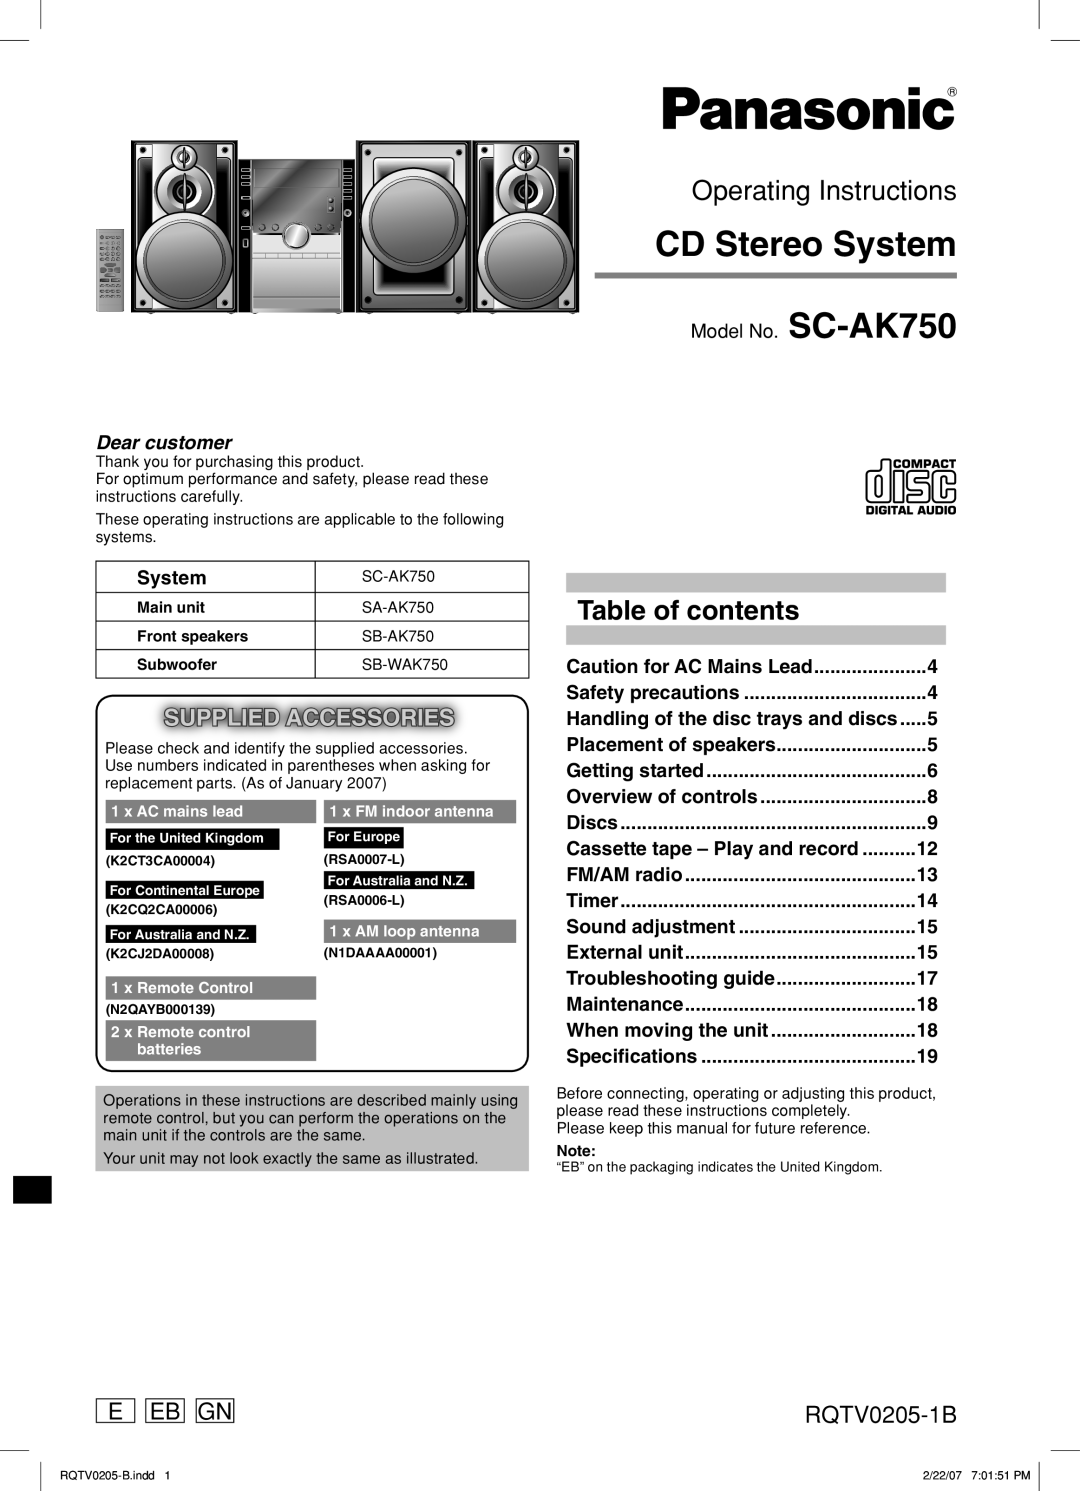 Panasonic SC-AK750 specifications E Eb Gn, RQTV0205-1B, Handling of the disc trays and discs, CD Stereo System 